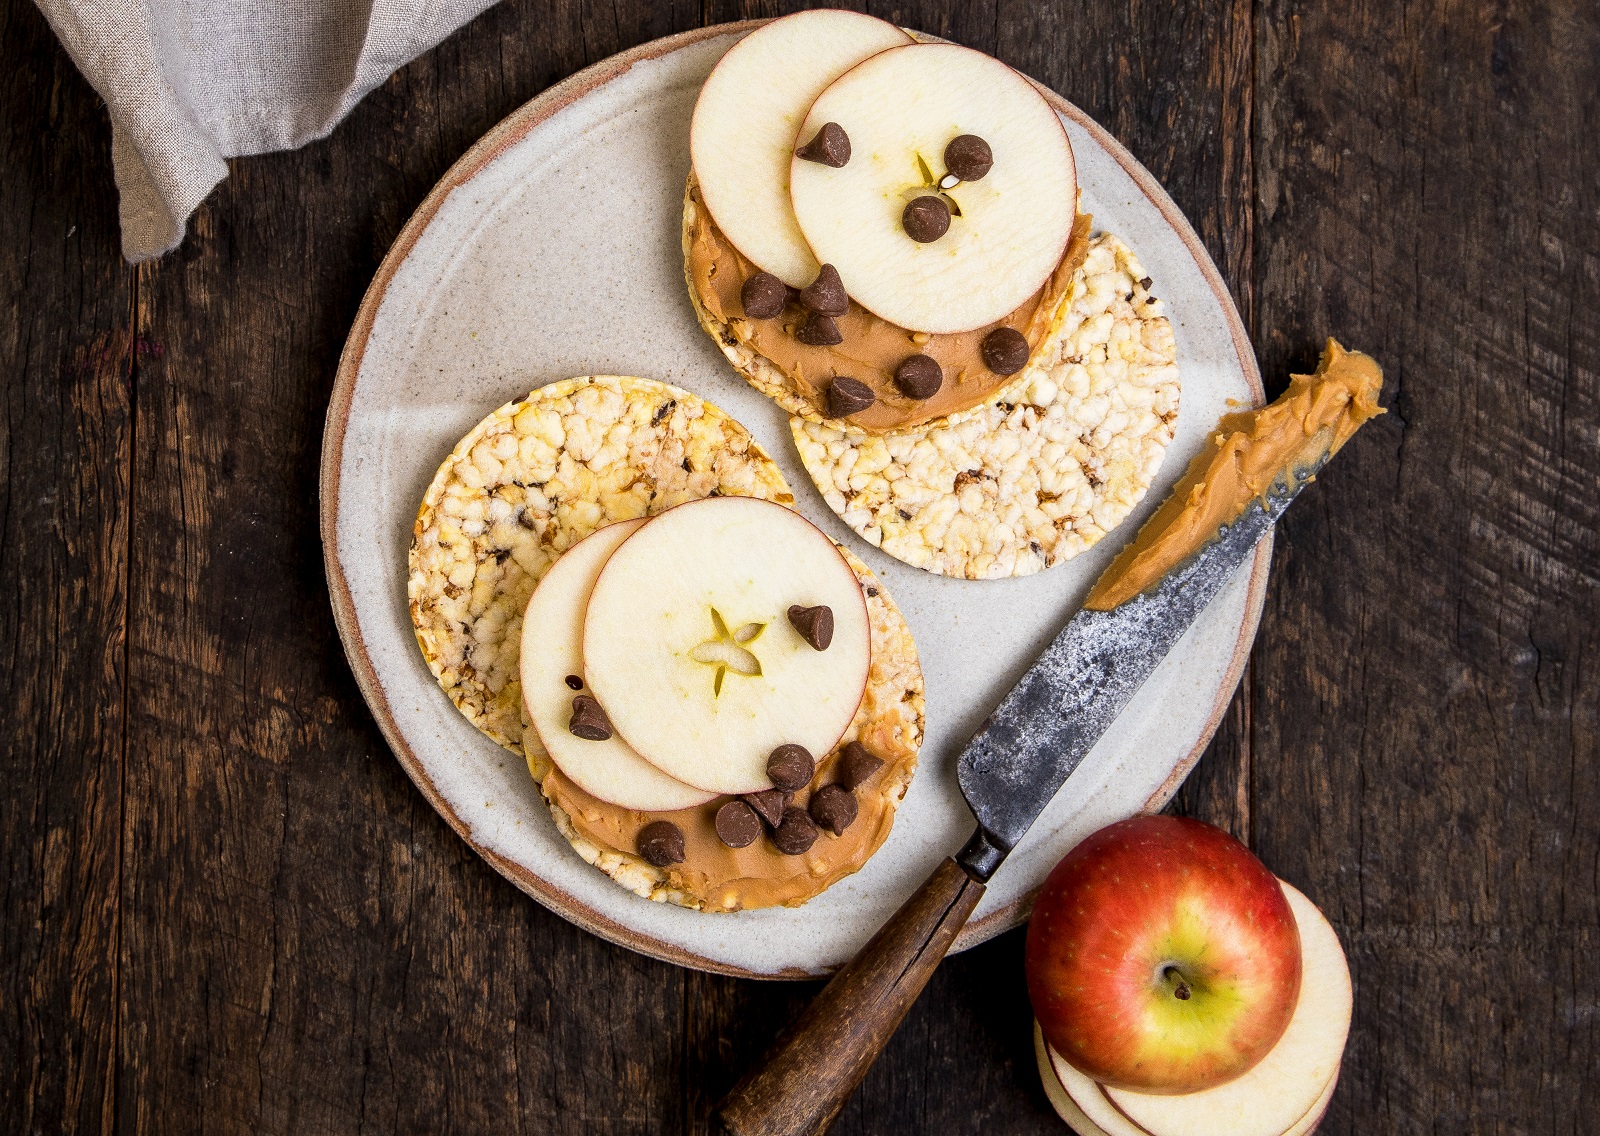 Peanut Butter, Apple & Choc Chips on CORN THINS slices